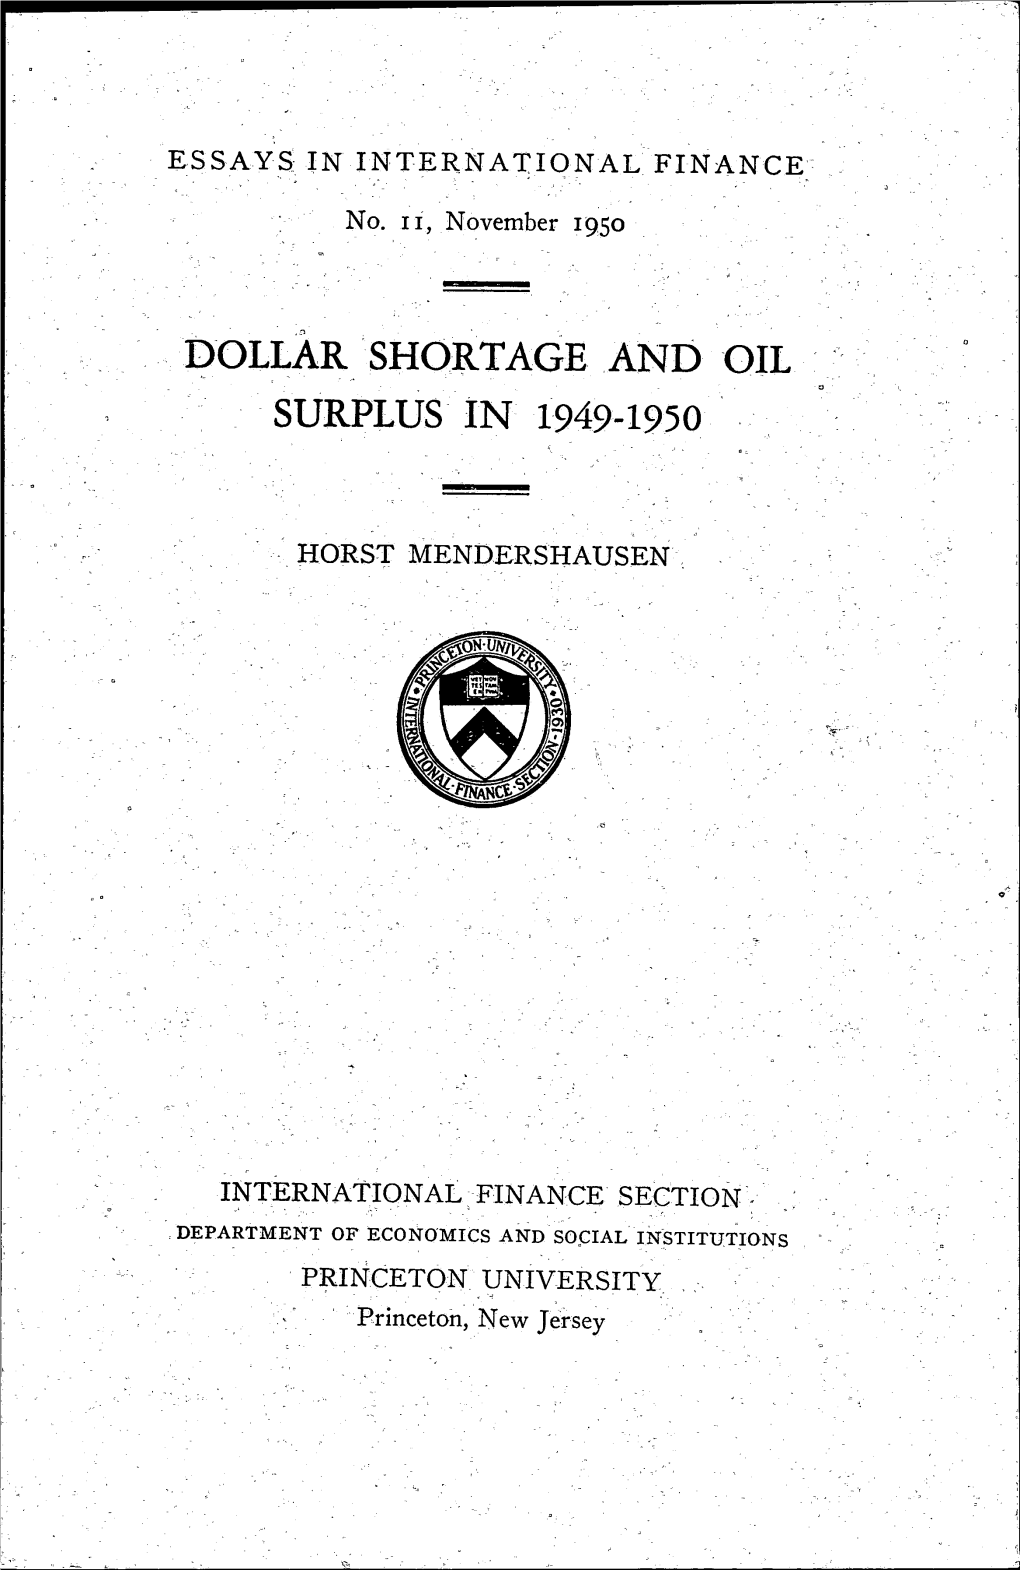 Dollar Shortage and Oil Surplus in 1949-1950